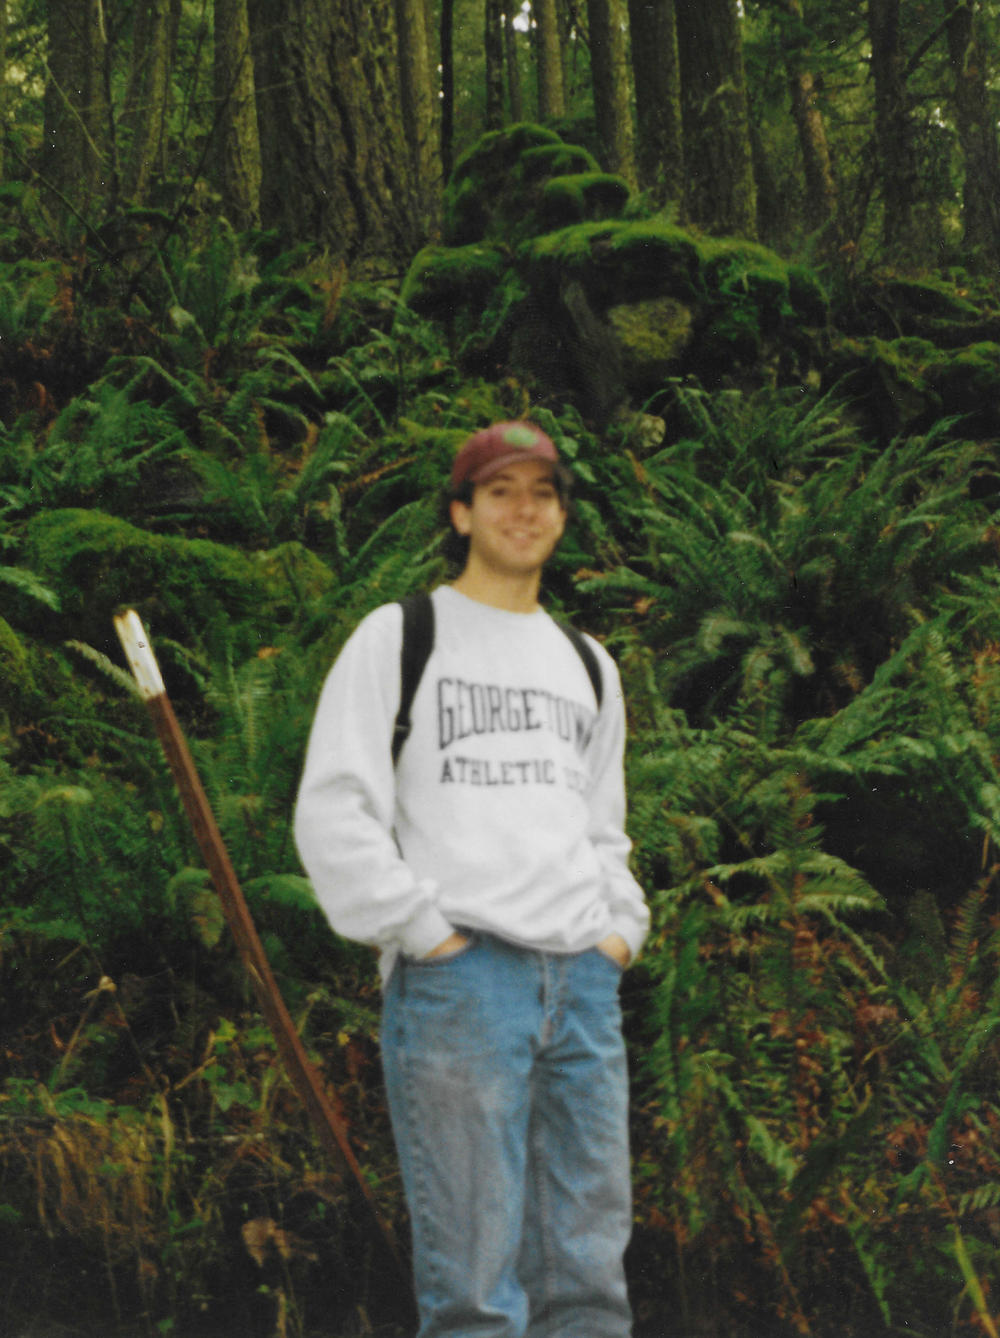 Kevin Aaron on a hike in the mid 90s in Oregon, where he attended college.